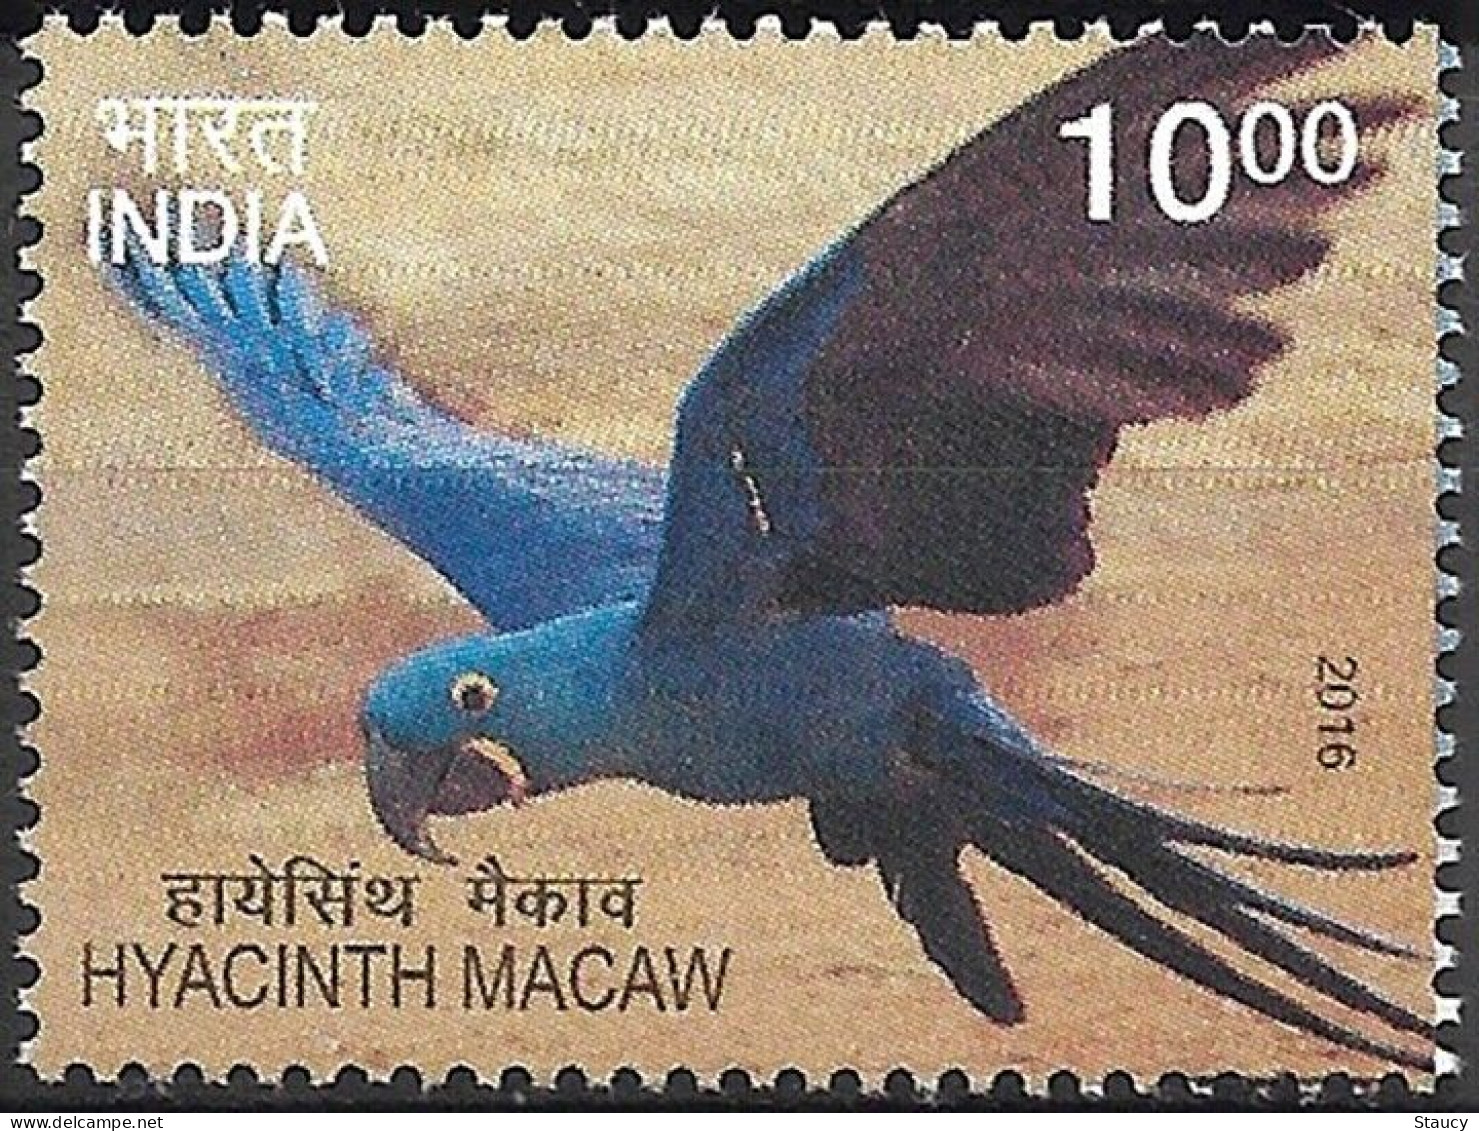 India 2016 Exotic Birds 1v Stamp MNH Macaw Parrot Amazon Crested, HYACINTH MACAW As Per Scan - Nuovi